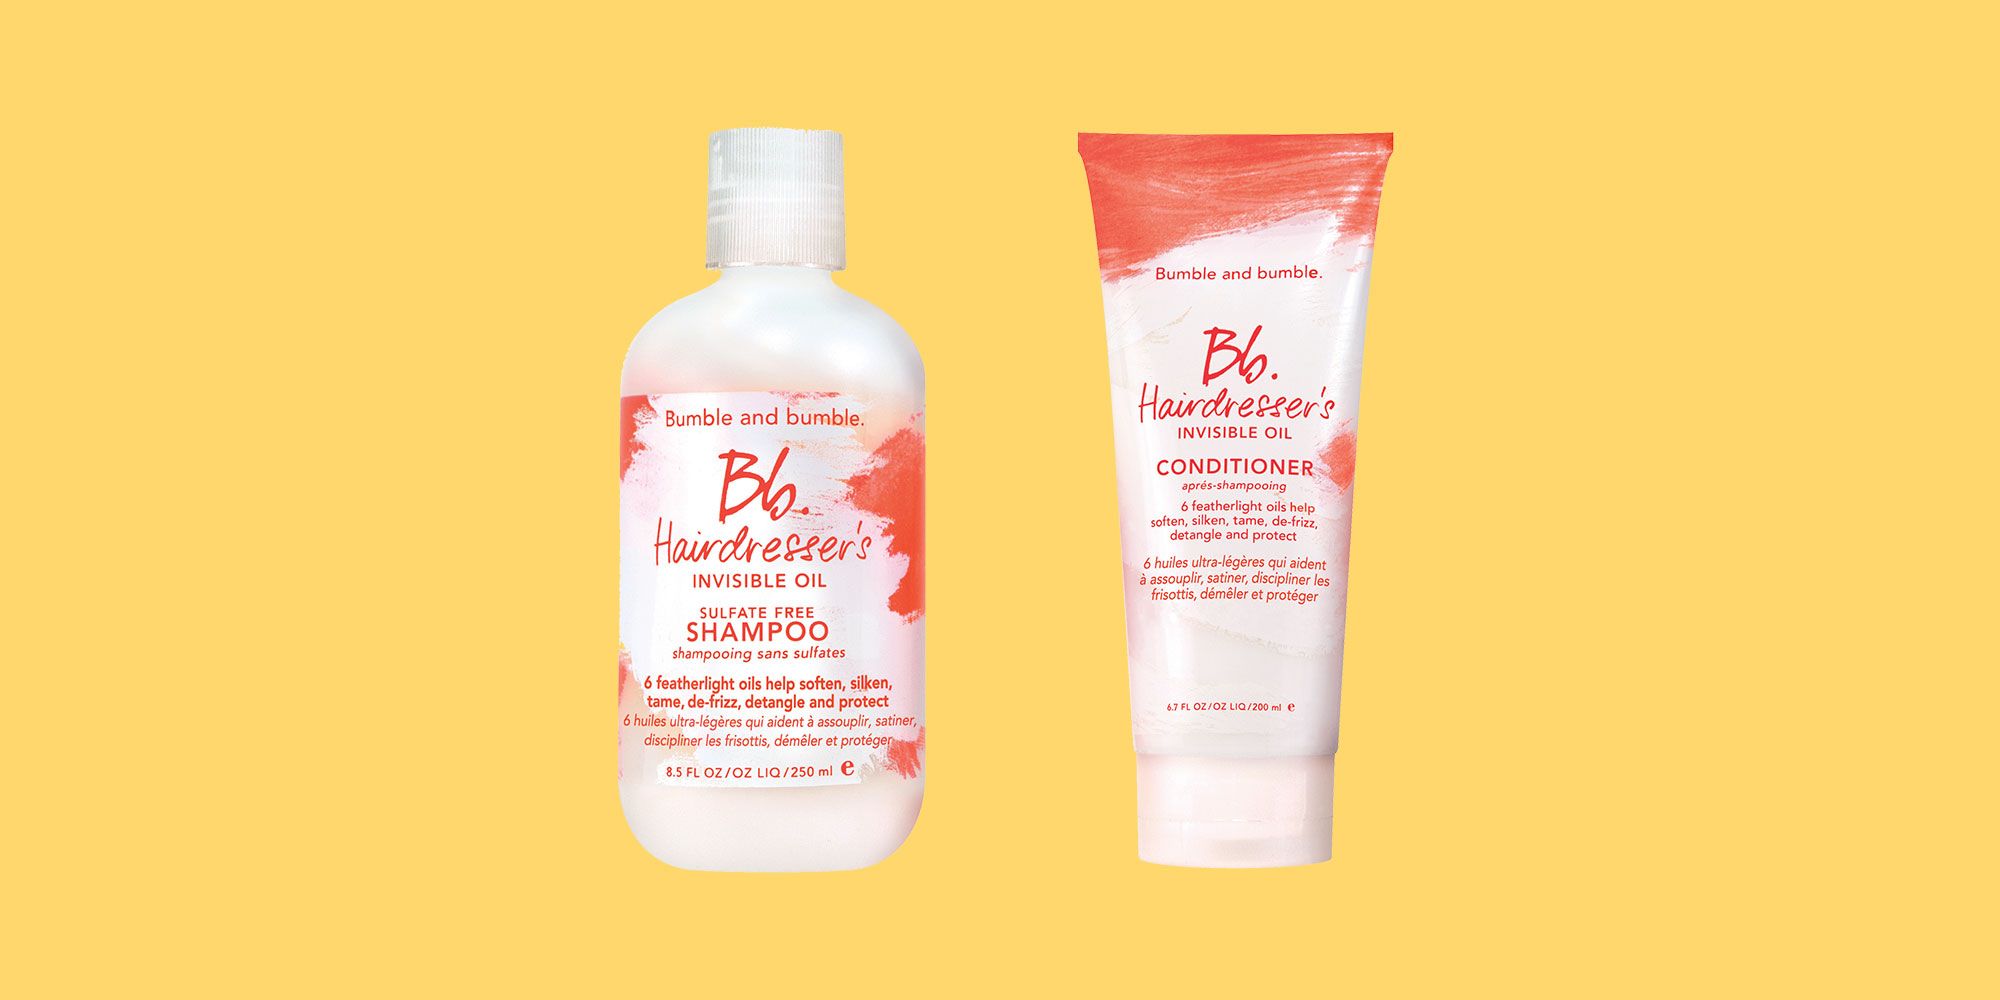 Bumble and Bumble Hairdresser's Invisible Oil Shampoo and Conditioner review